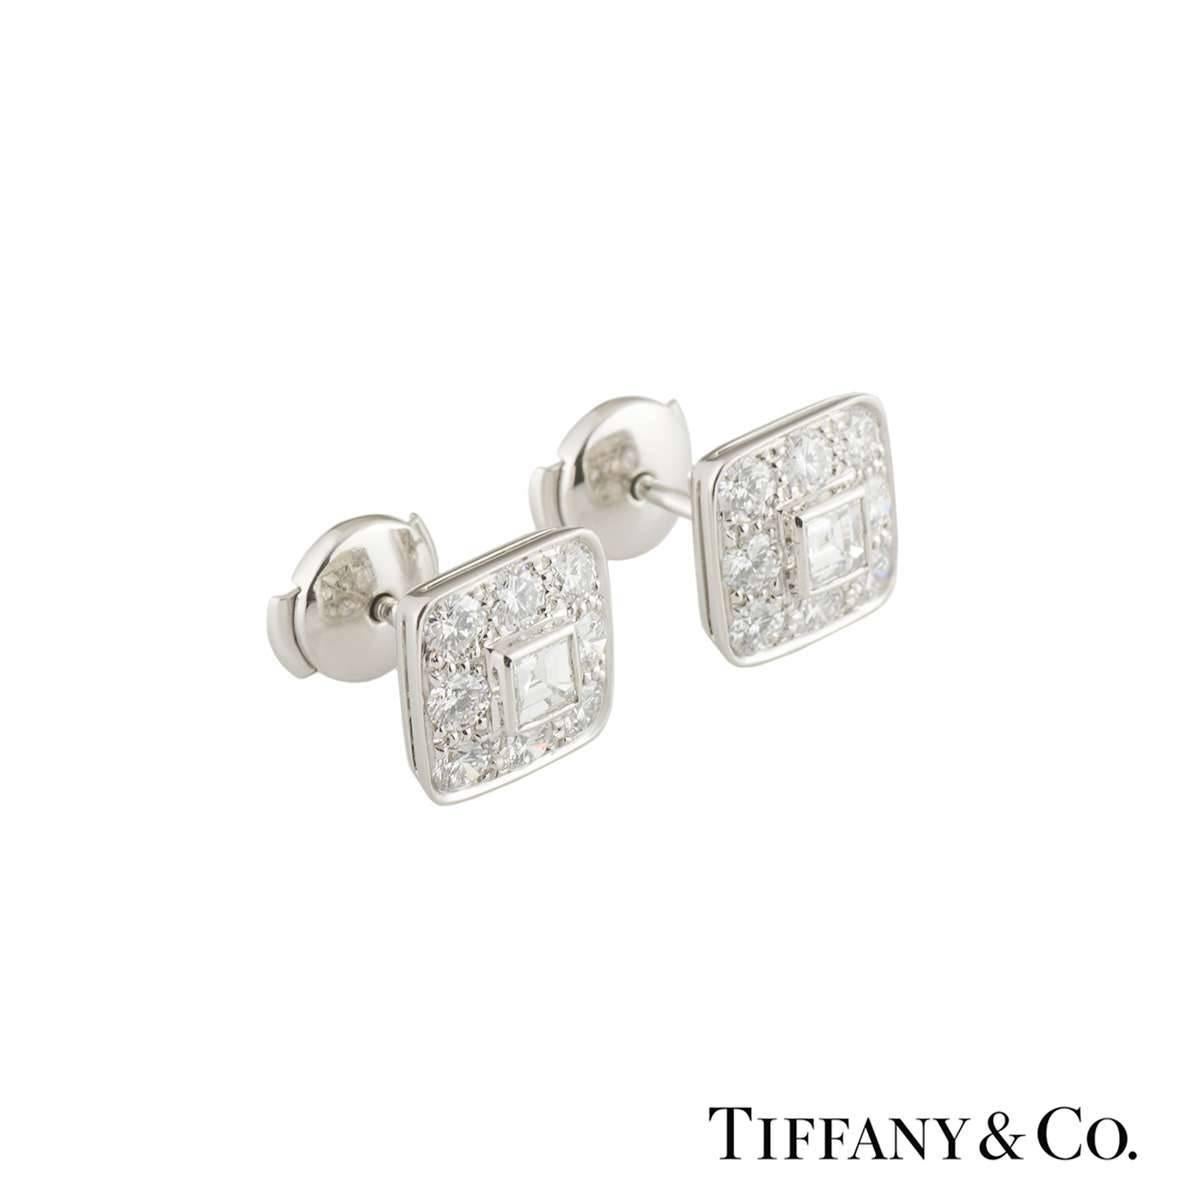 A beautiful pair of platinum diamond Tiffany & Co. earrings. The earrings each comprises of an asscher cut diamond set to the centre in a rubover setting with 8 round brilliant cut diamonds in a pave setting. The diamonds have a total approximate